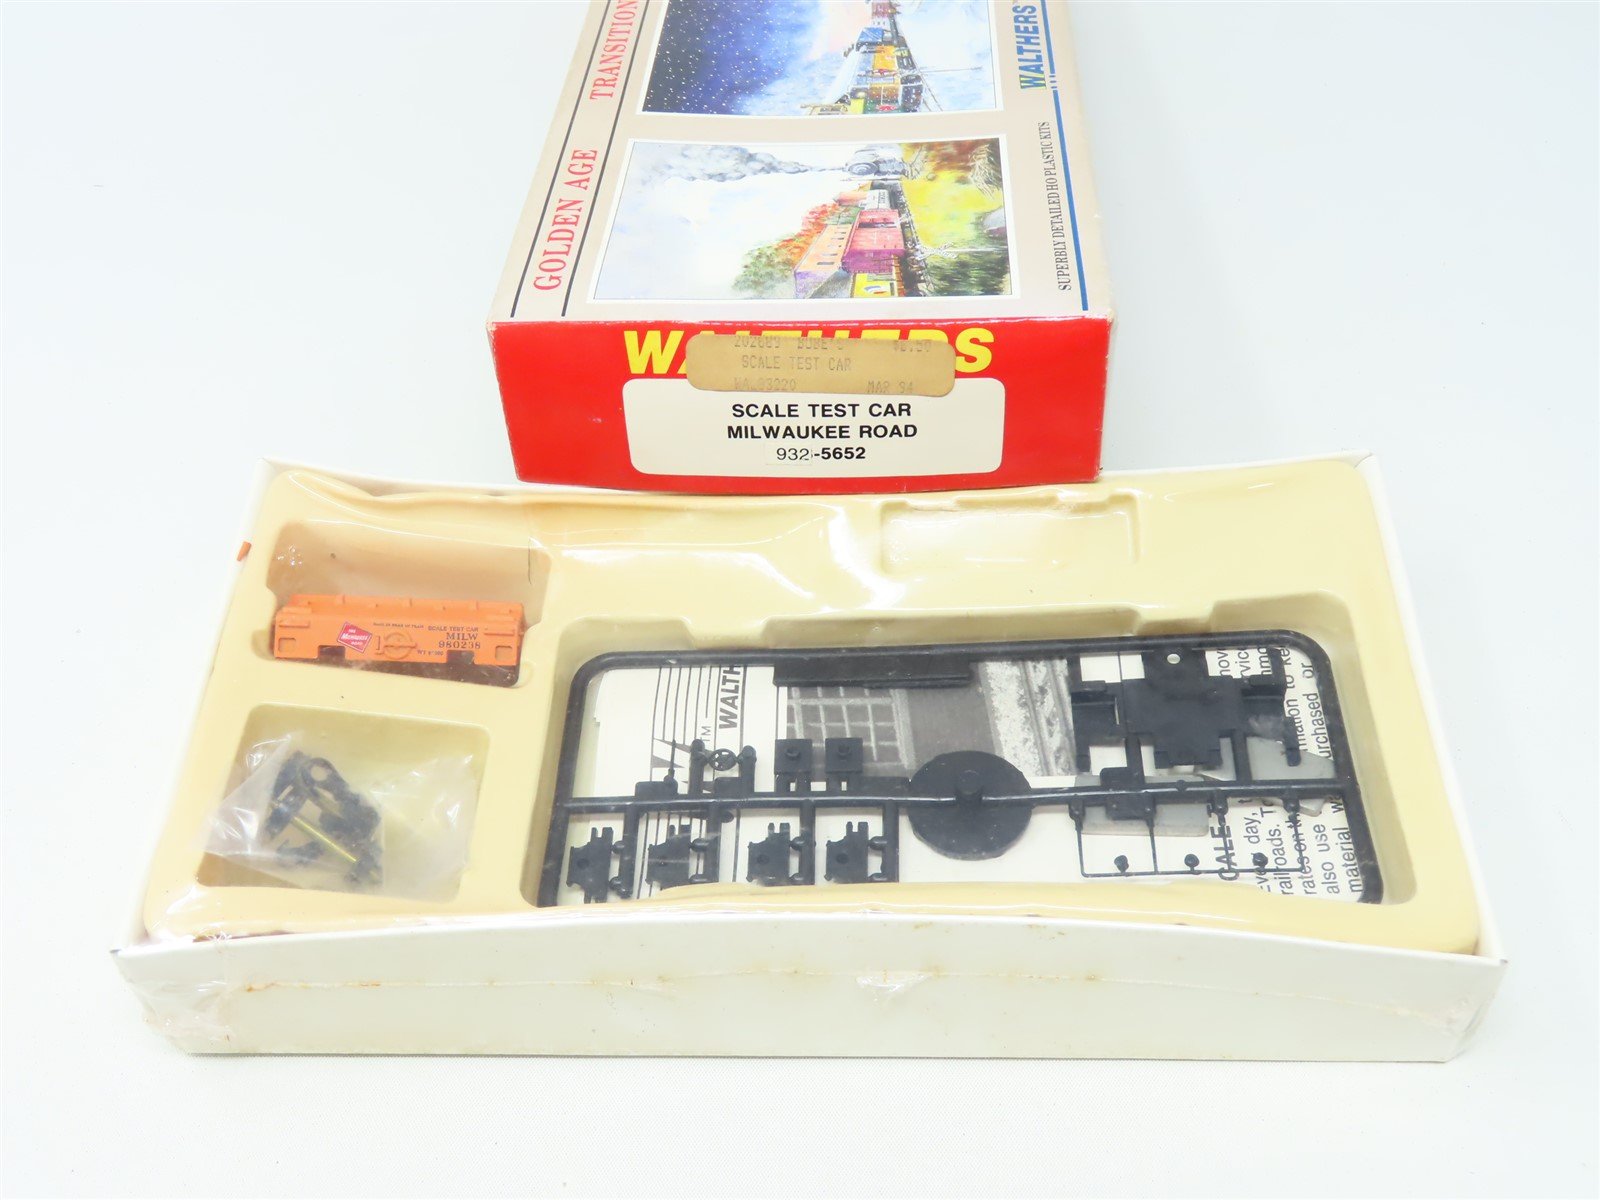 HO Scale Walthers Kit 932-5652 MILW Milwaukee Road Scale Test Car #980238